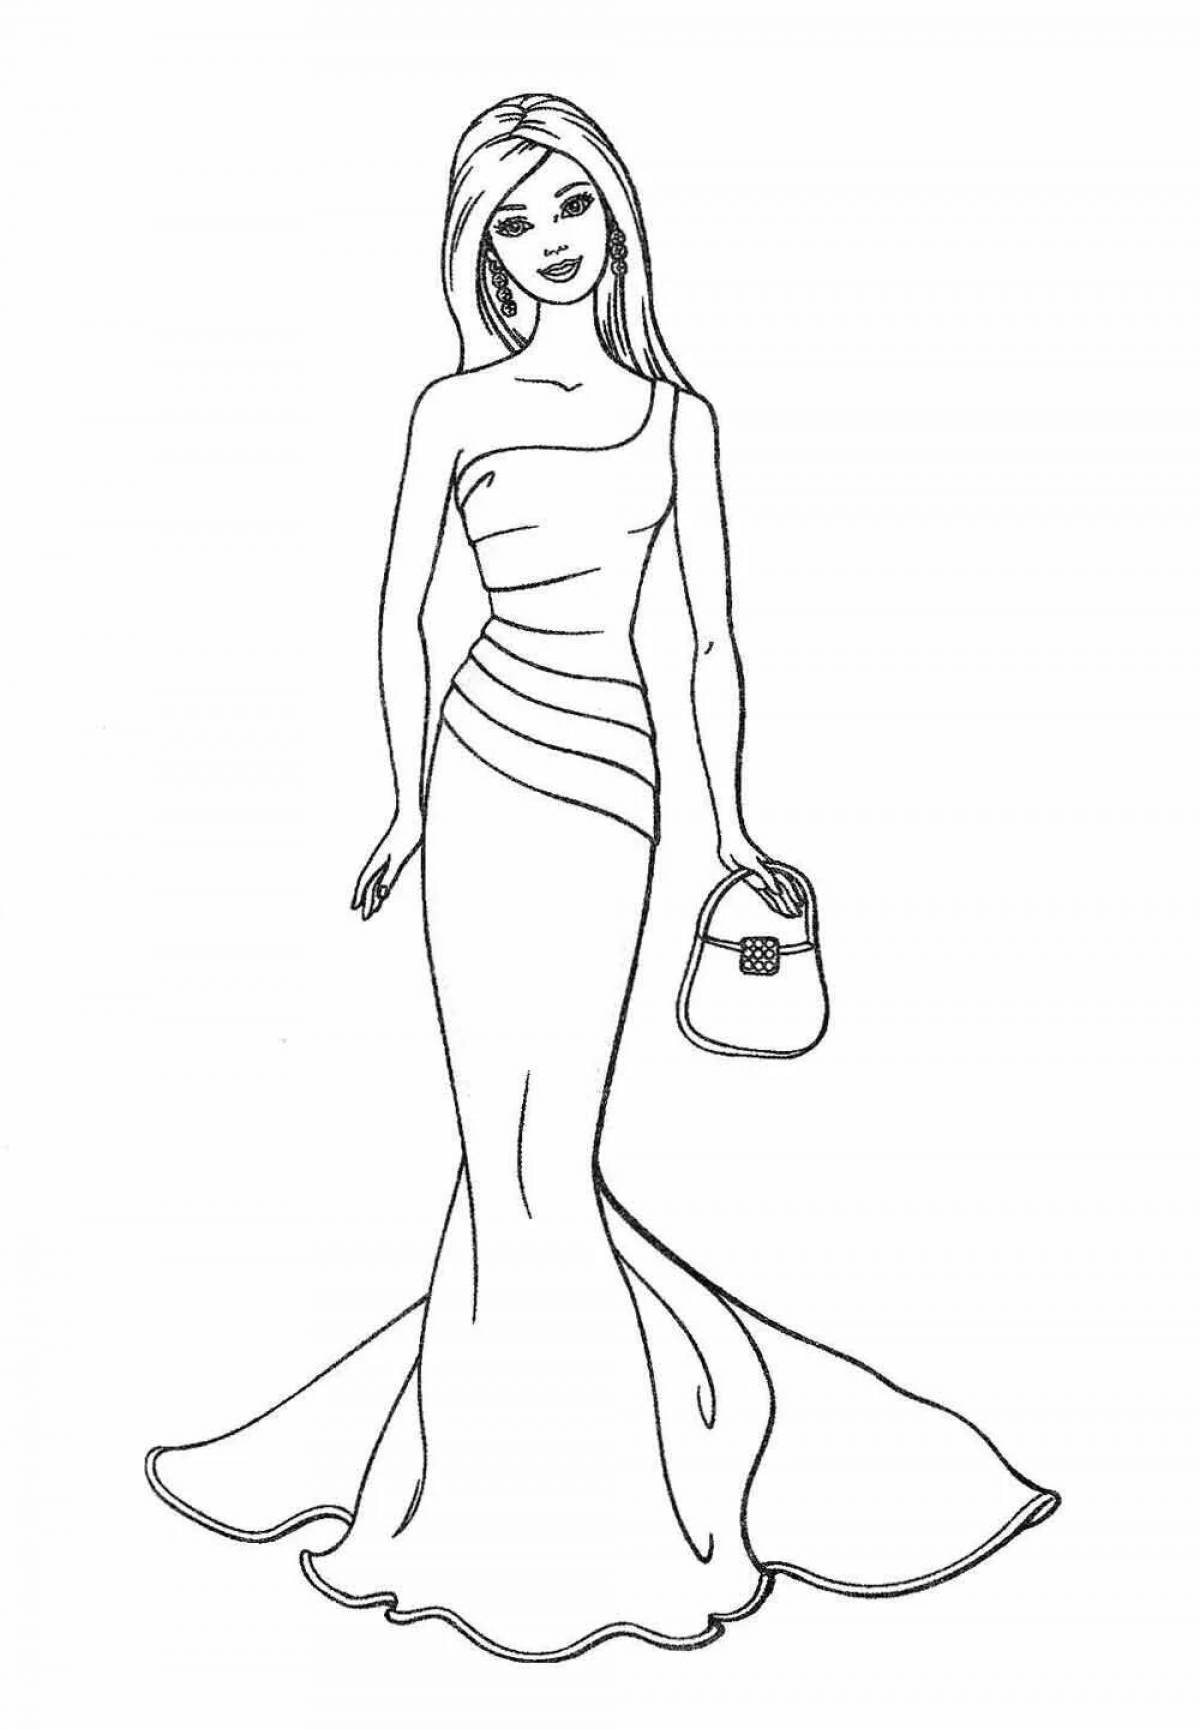 Sparkling barbie doll coloring pages